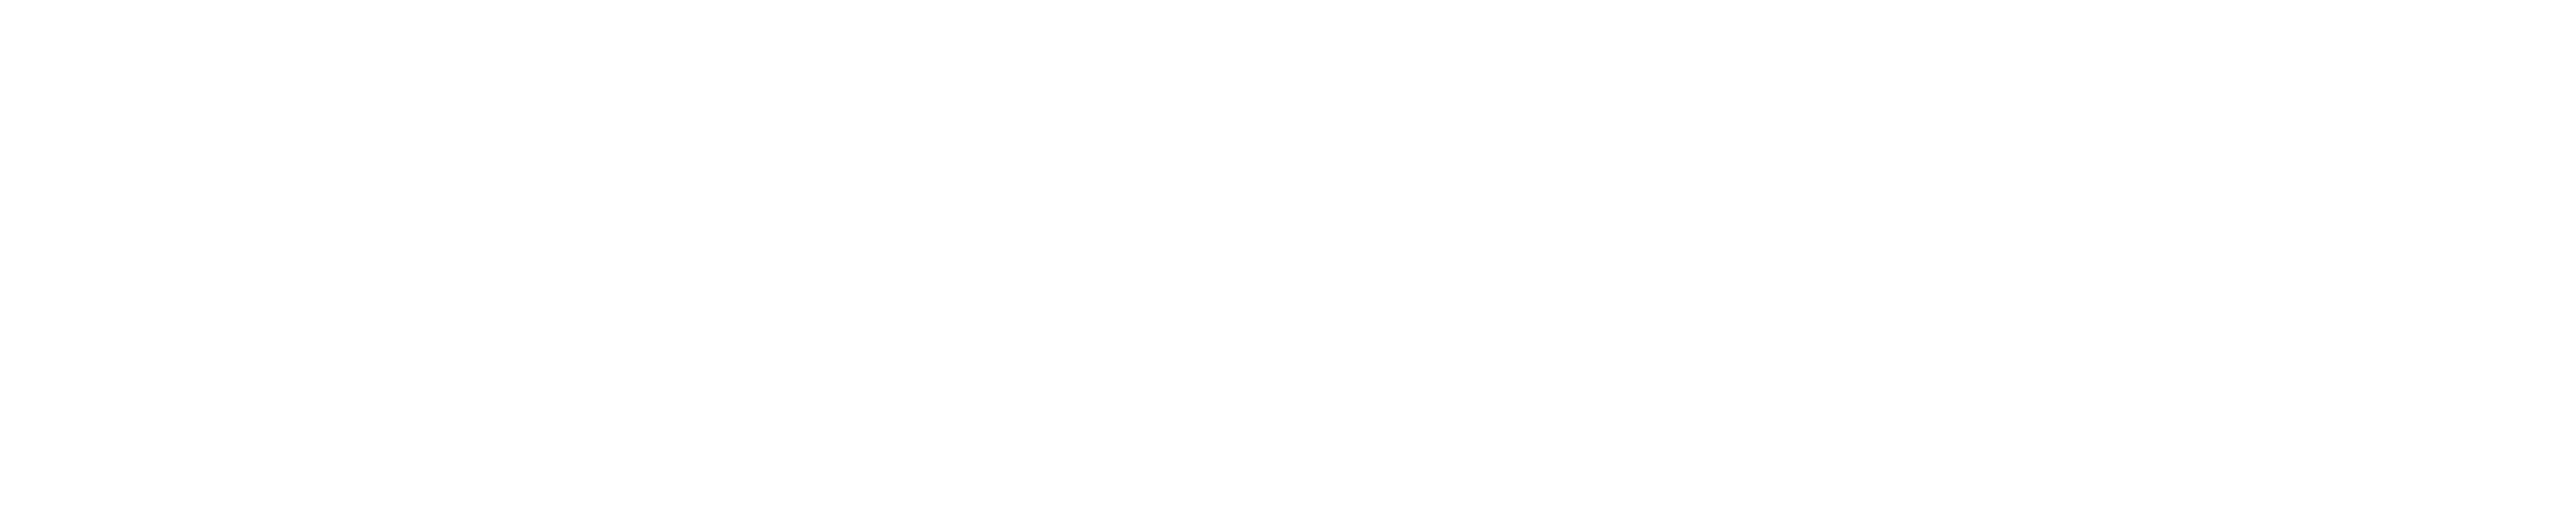 40 years of quality international student assessments